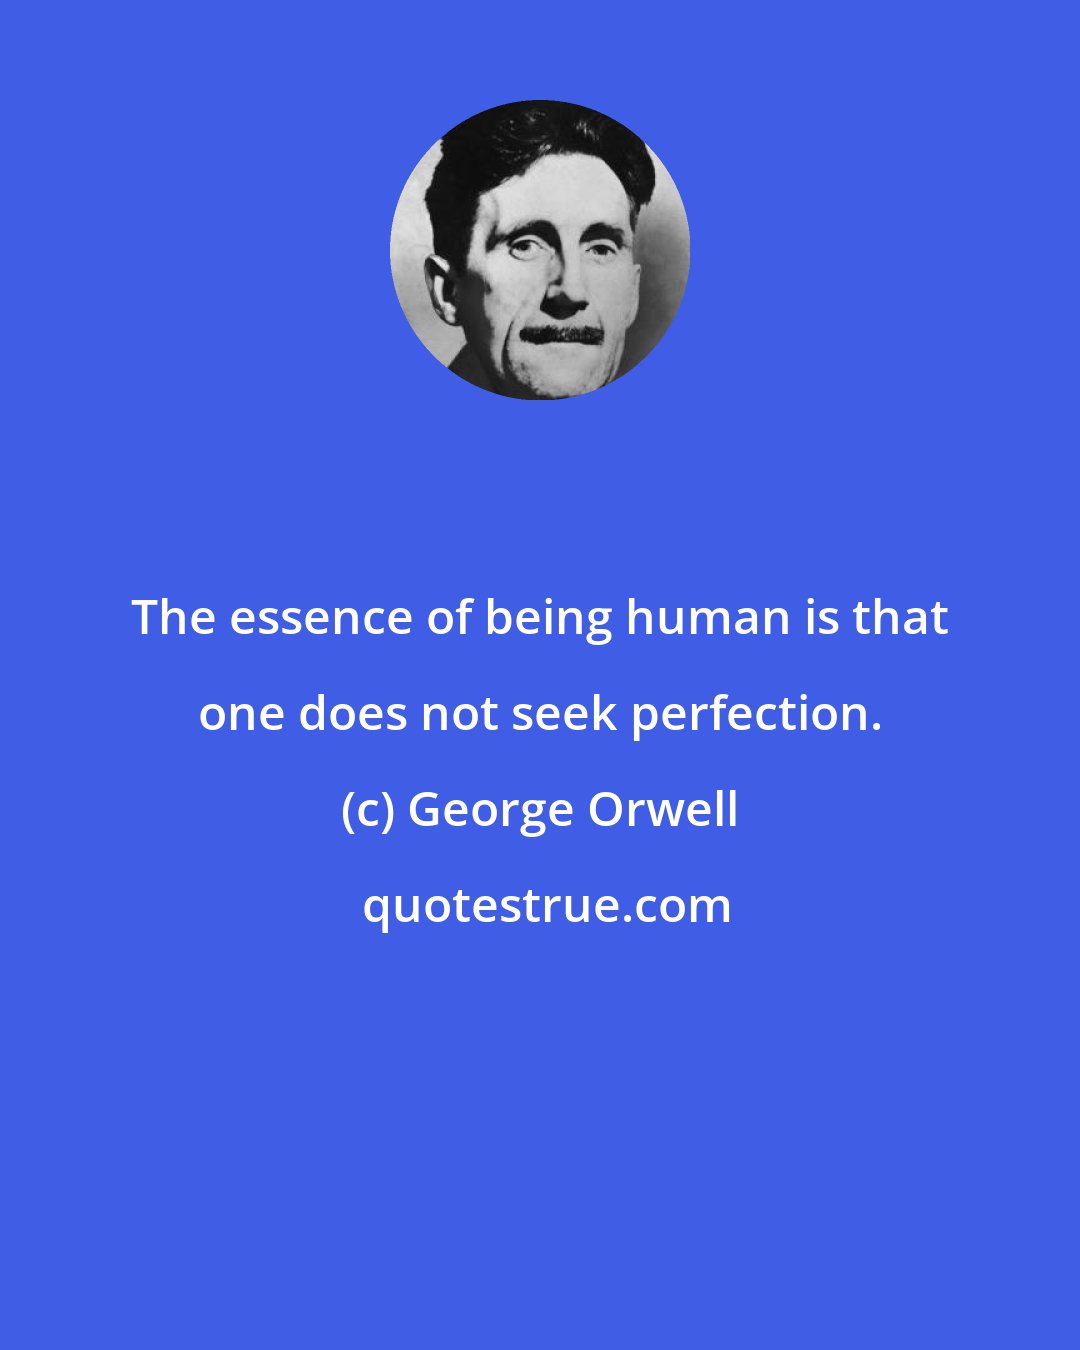 George Orwell: The essence of being human is that one does not seek perfection.